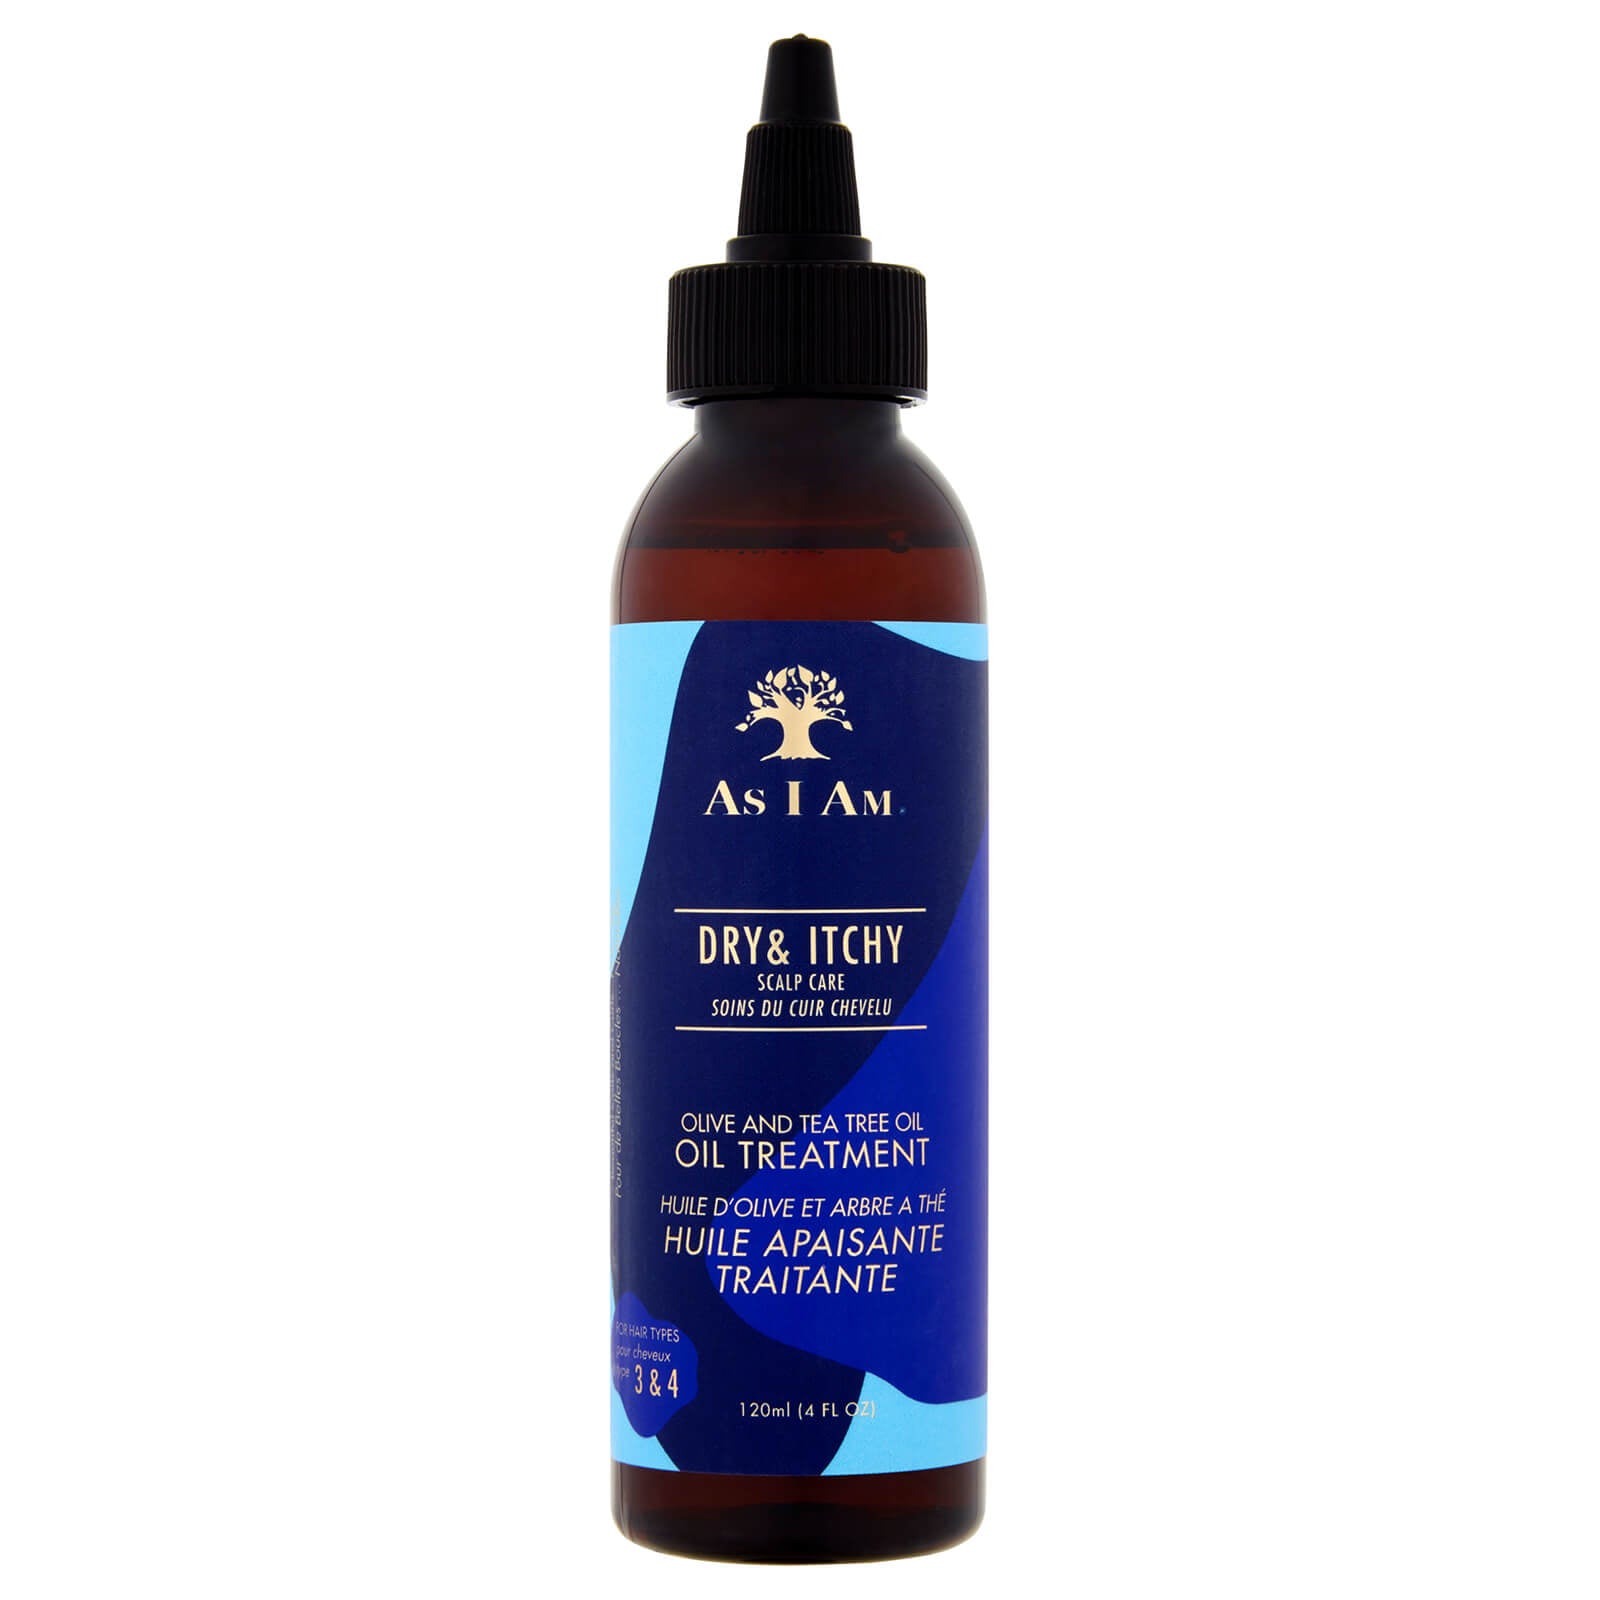 As I Am - Dry & Itchy Oil Treatment 4oz